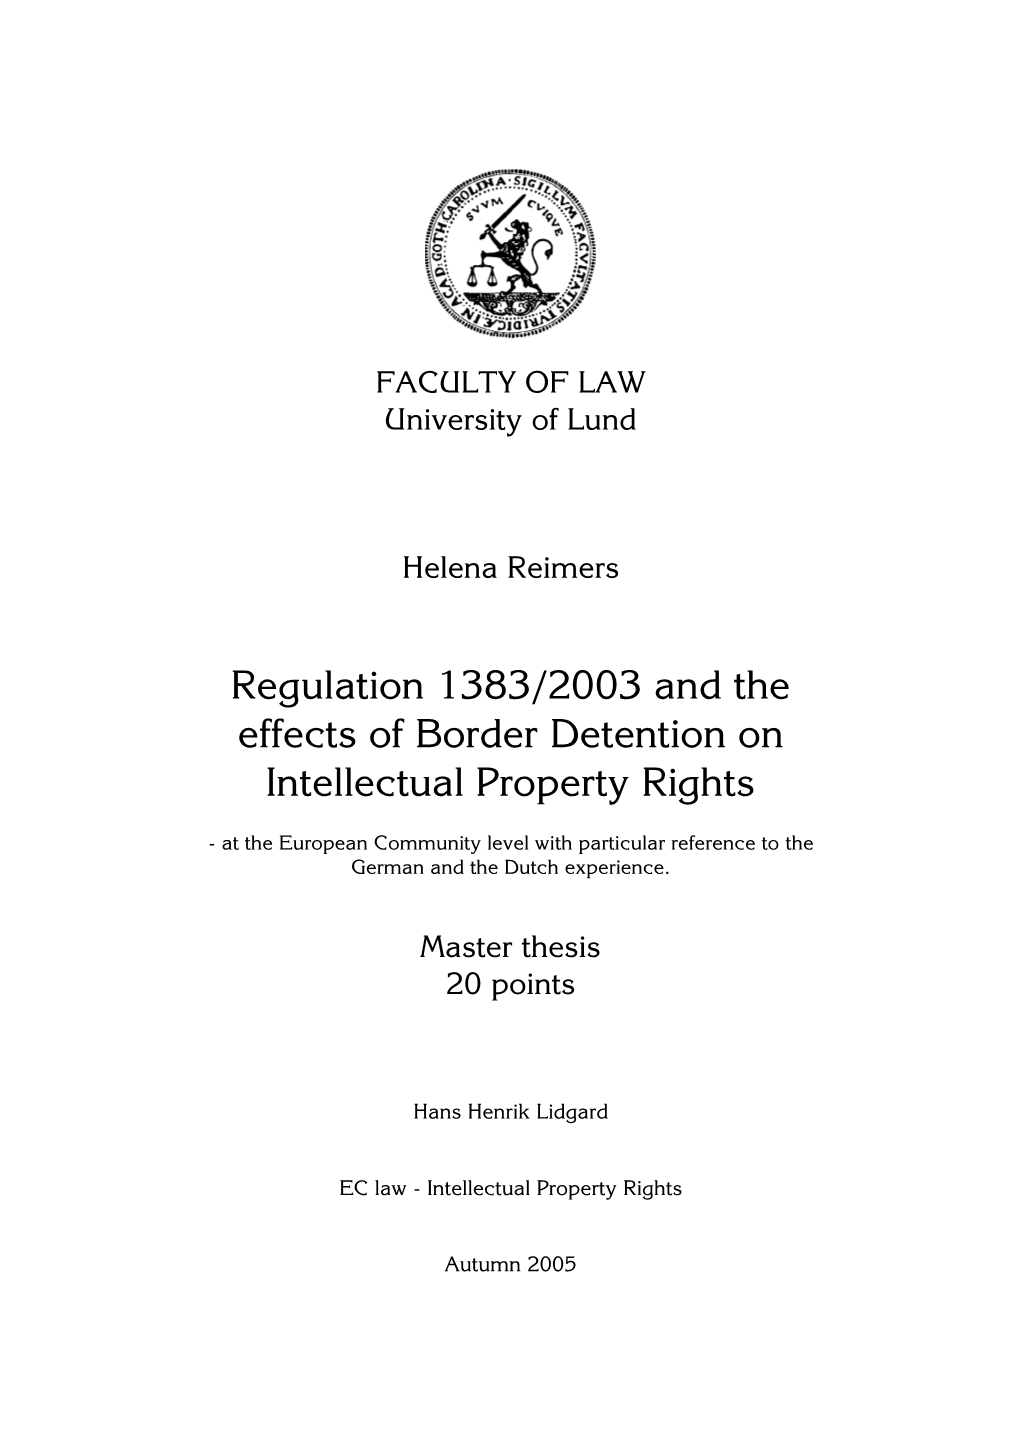 Regulation 1383/2003 and the Effects of Border Detention on Intellectual Property Rights